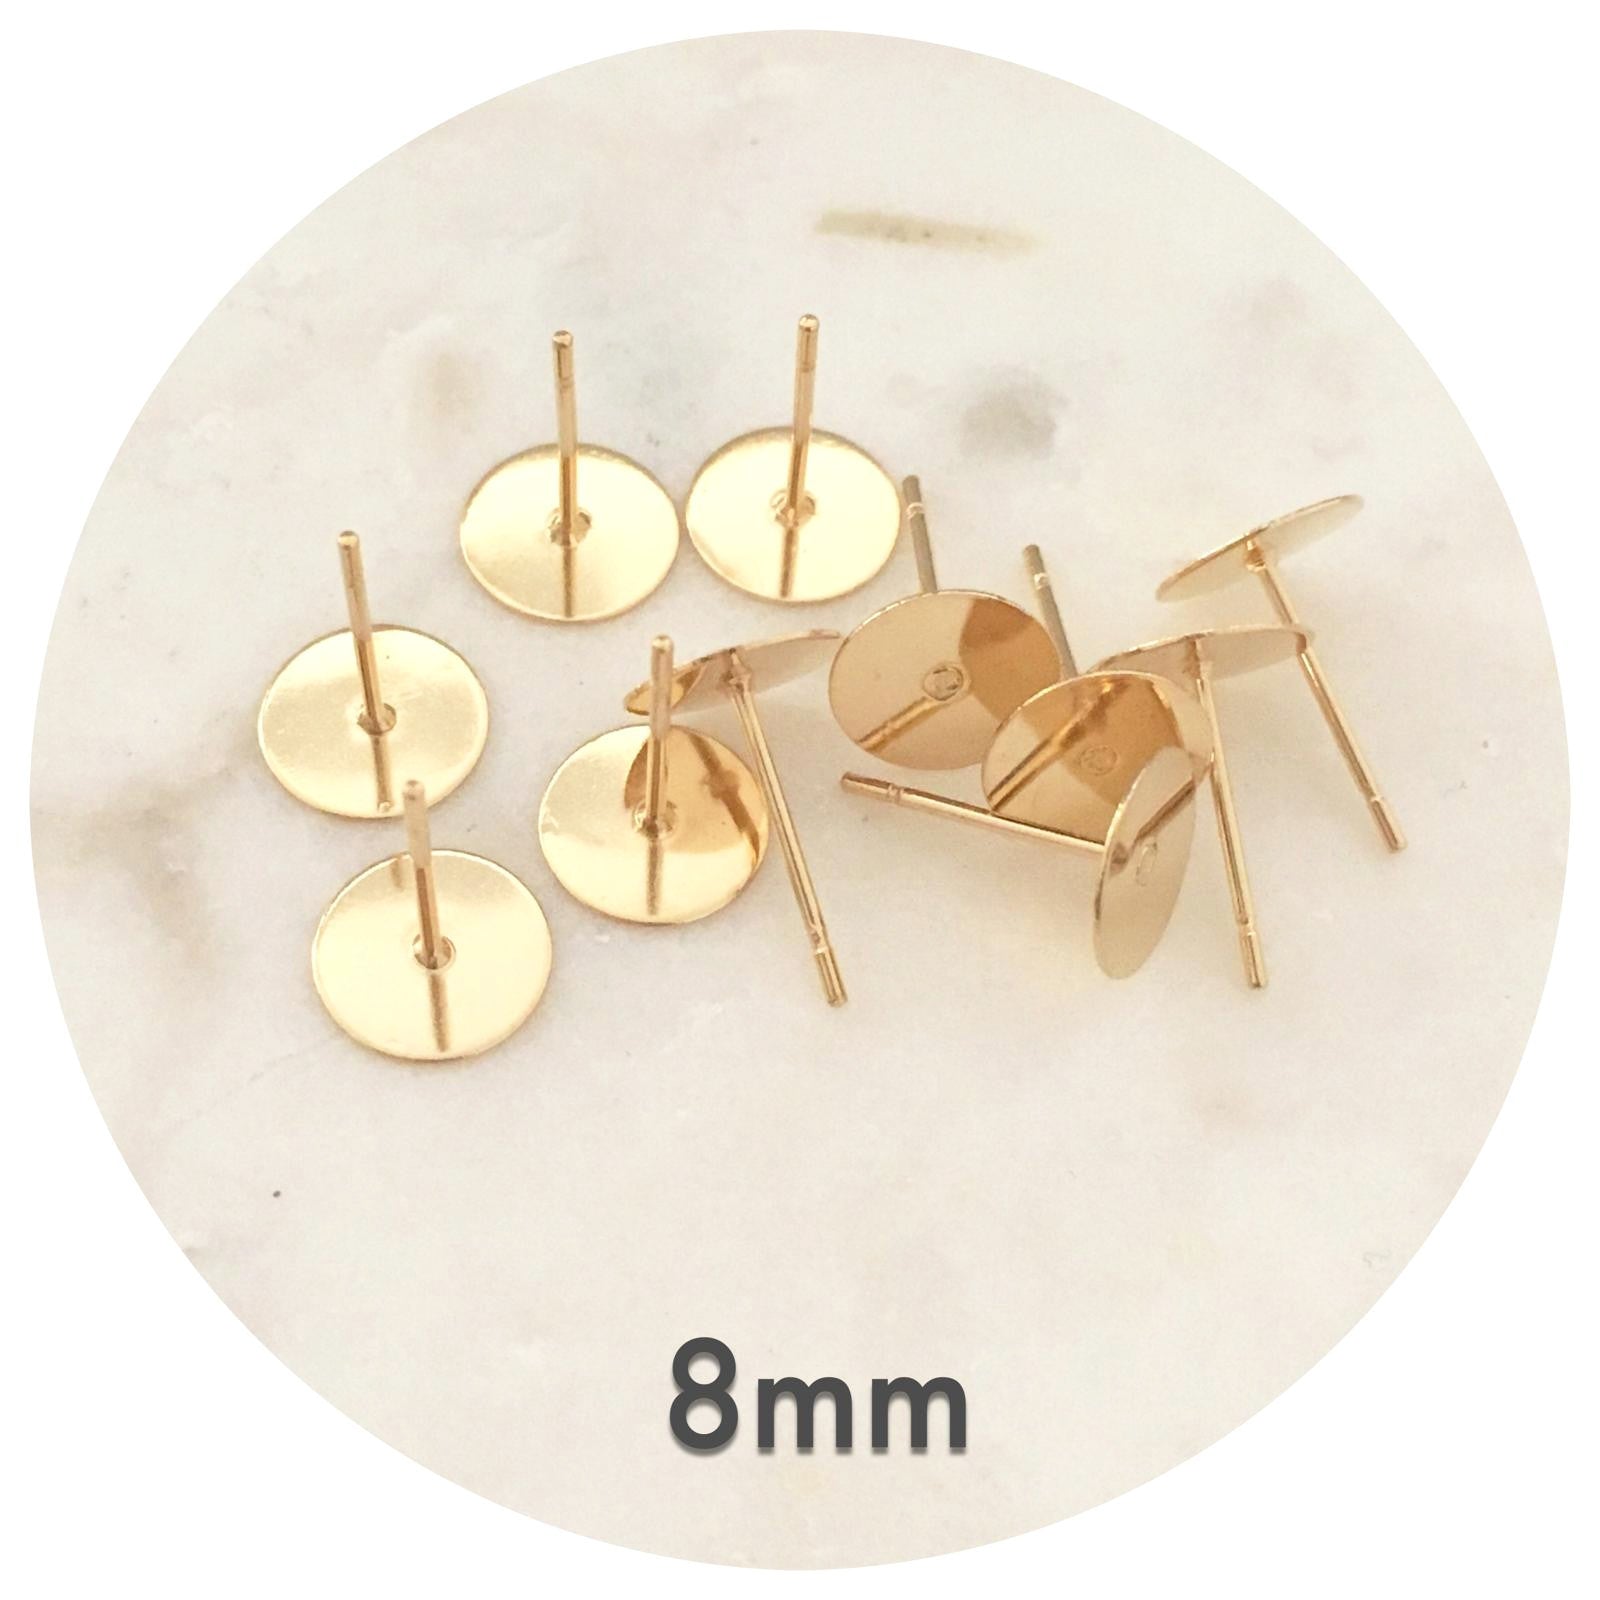 8mm Gold Stainless Steel Earring Stud Posts - 50 pcs